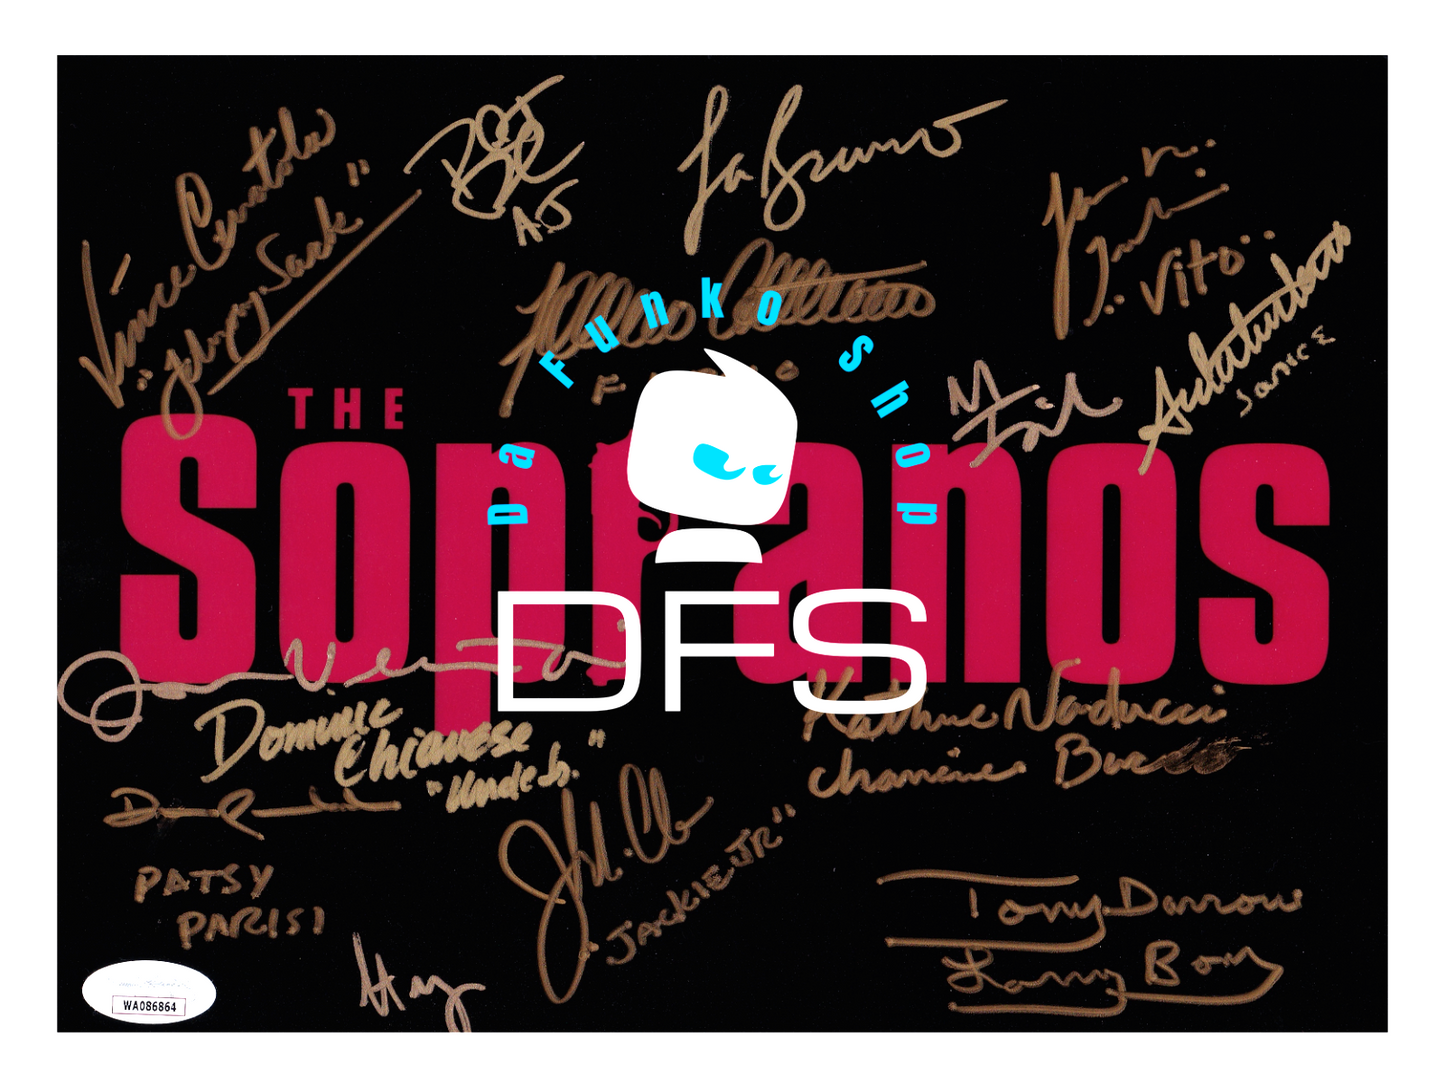 1/1 Rare The Sopranos Framed Authentic Autographed Photograph 8x10 - Picture is Signed by 14 Sopranos Cast Members Signatures are Authenticated By JSA ✅ - DaFunkoShop - Photograph